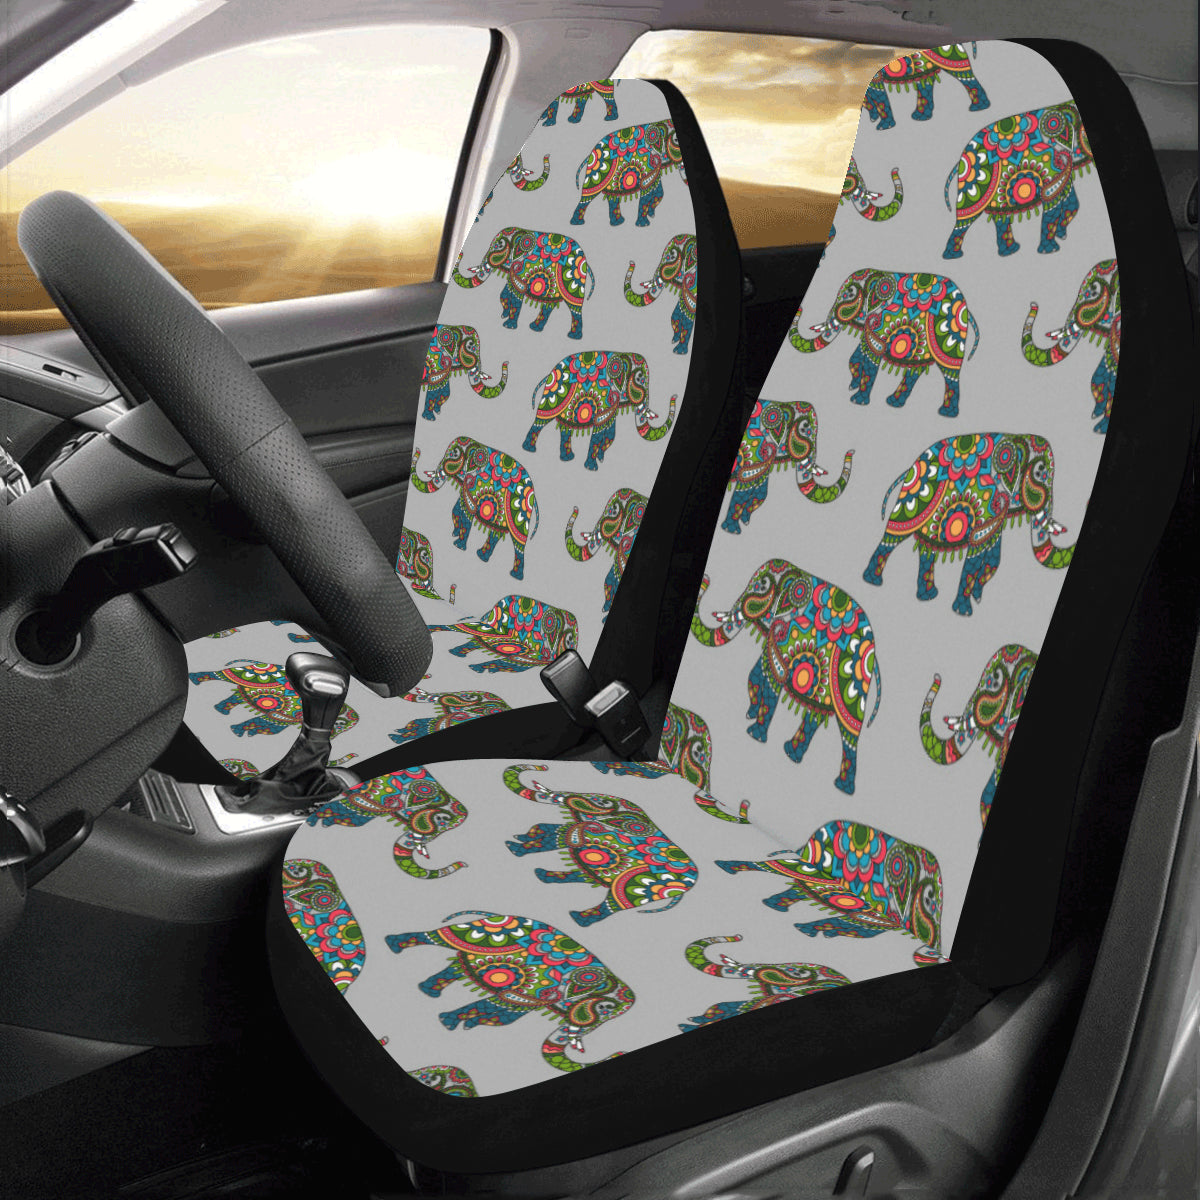 Elephant Car Seat Covers Set of 2pcs, Ethnic Boho Mandala Seat Cover Cute Front Seat Covers, Car SUV Vans Seat Protector Accessory Starcove Fashion